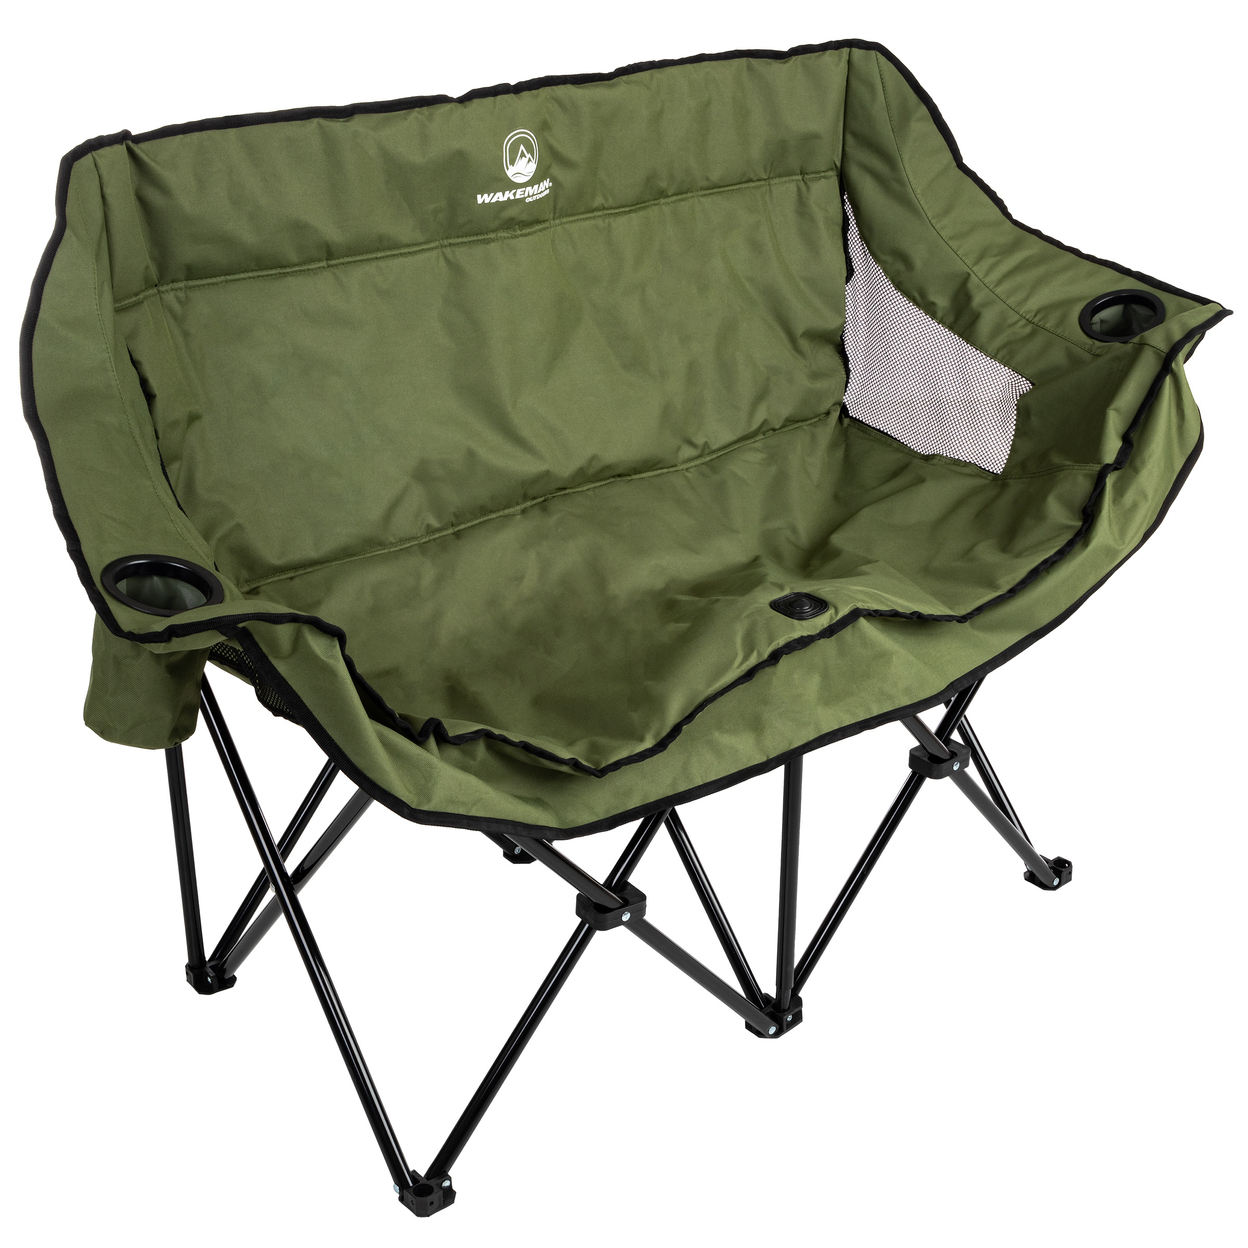 Double Camping Chair Olive Foldable Portable Couch With 2 Cupholders And Padded Seats